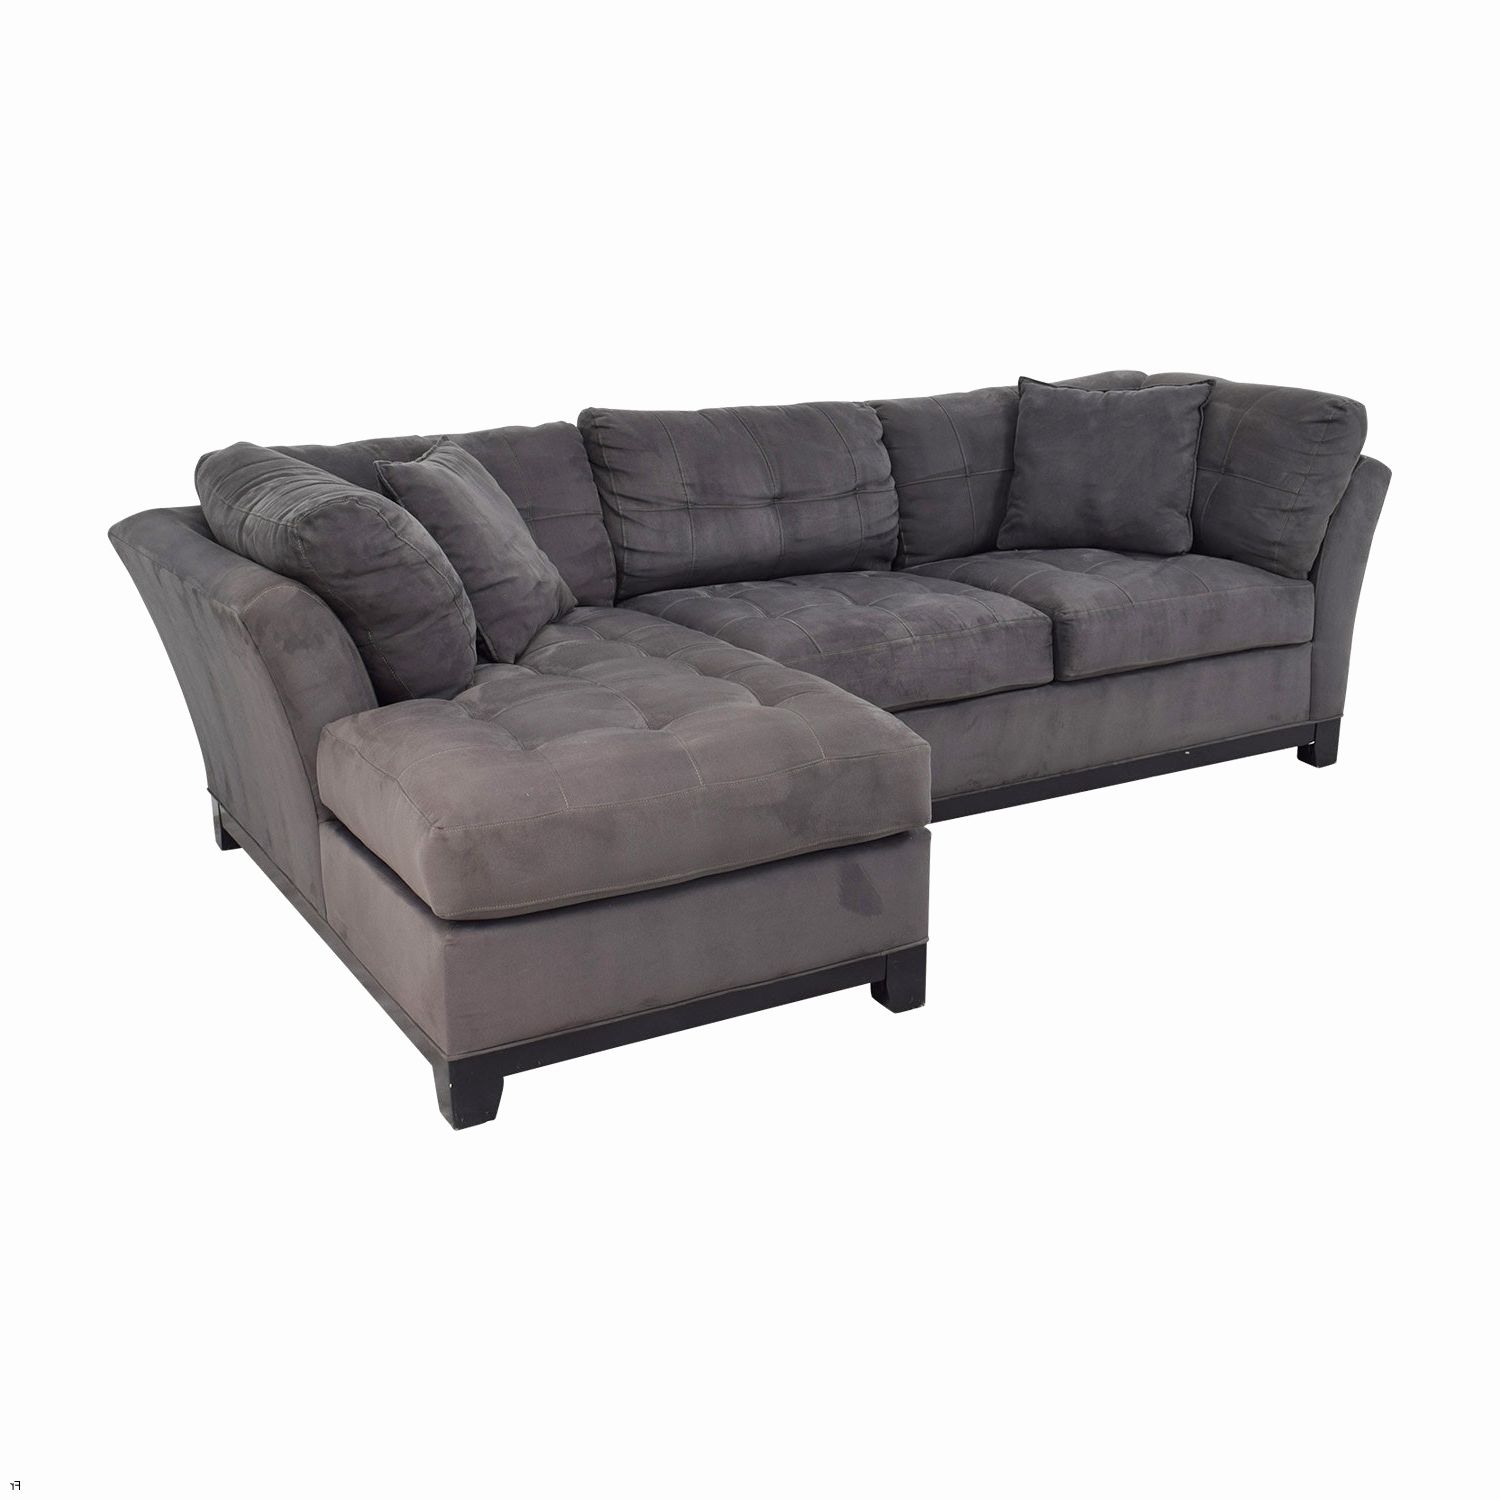 Newest Raymour And Flanigan Sectional Sofas For Awesome 7 Seat Sectional Sofa Pictures – Home Design (View 3 of 15)